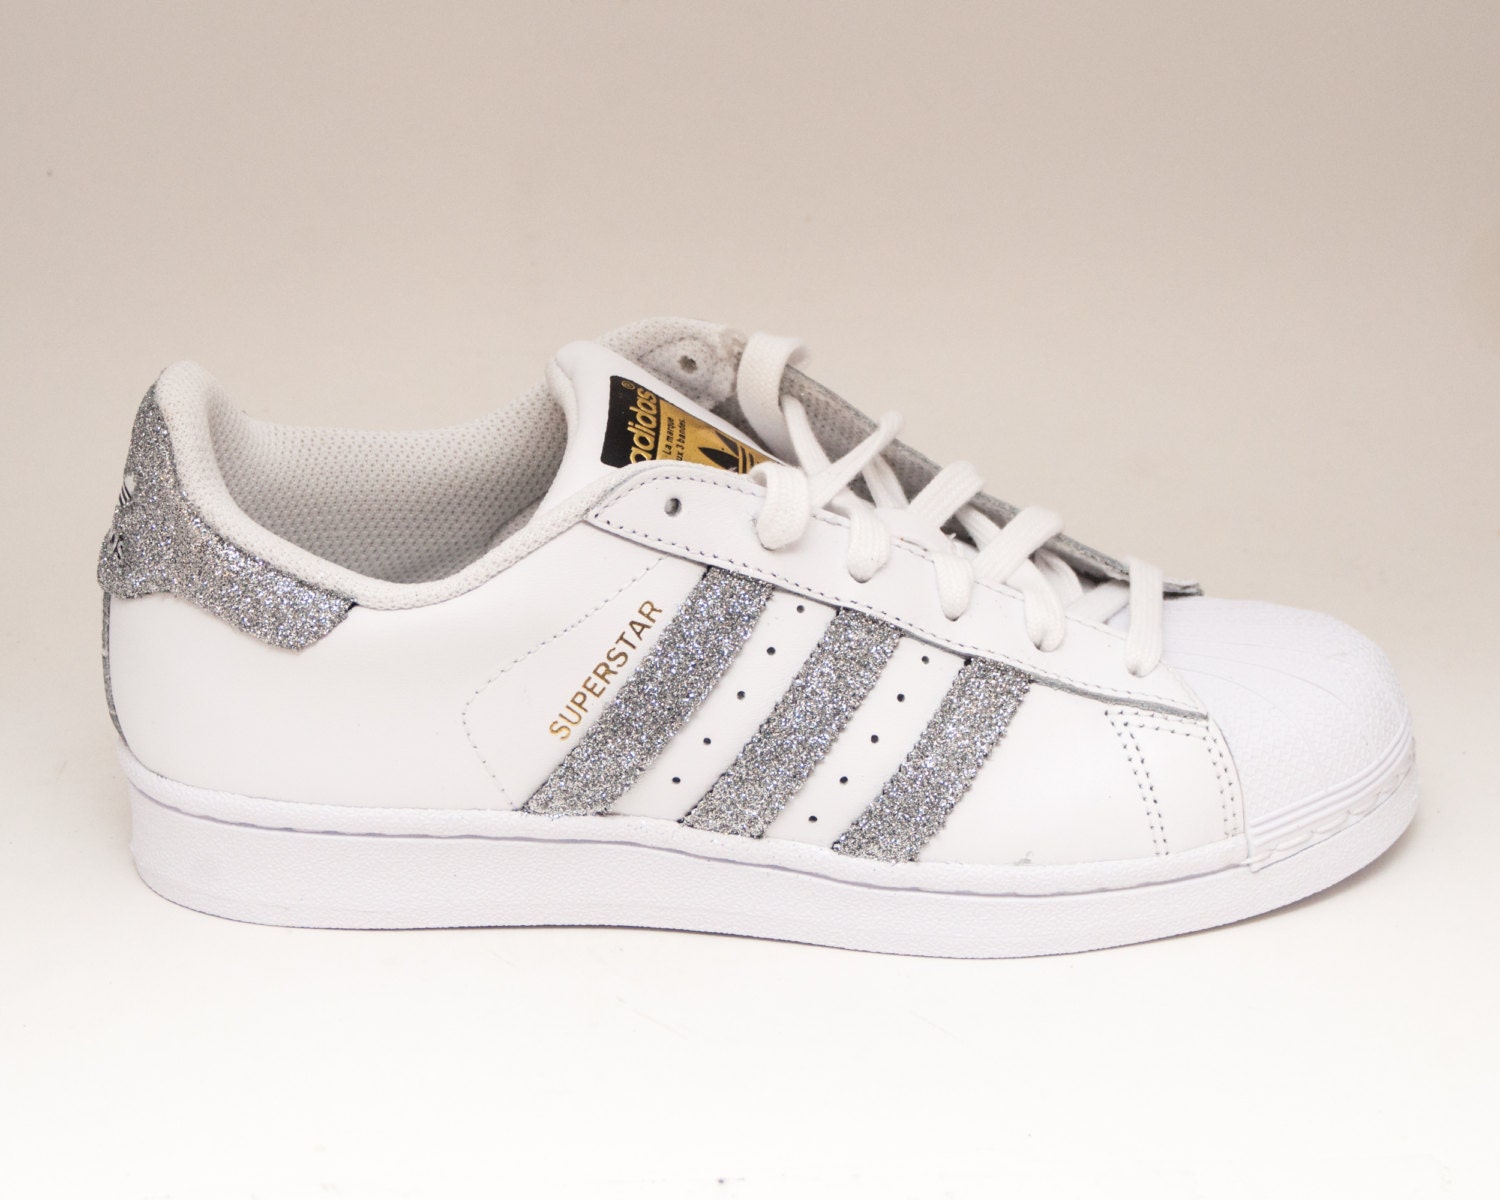 Glitter Limited Edition Silver Adidas Superstars by princesspumps